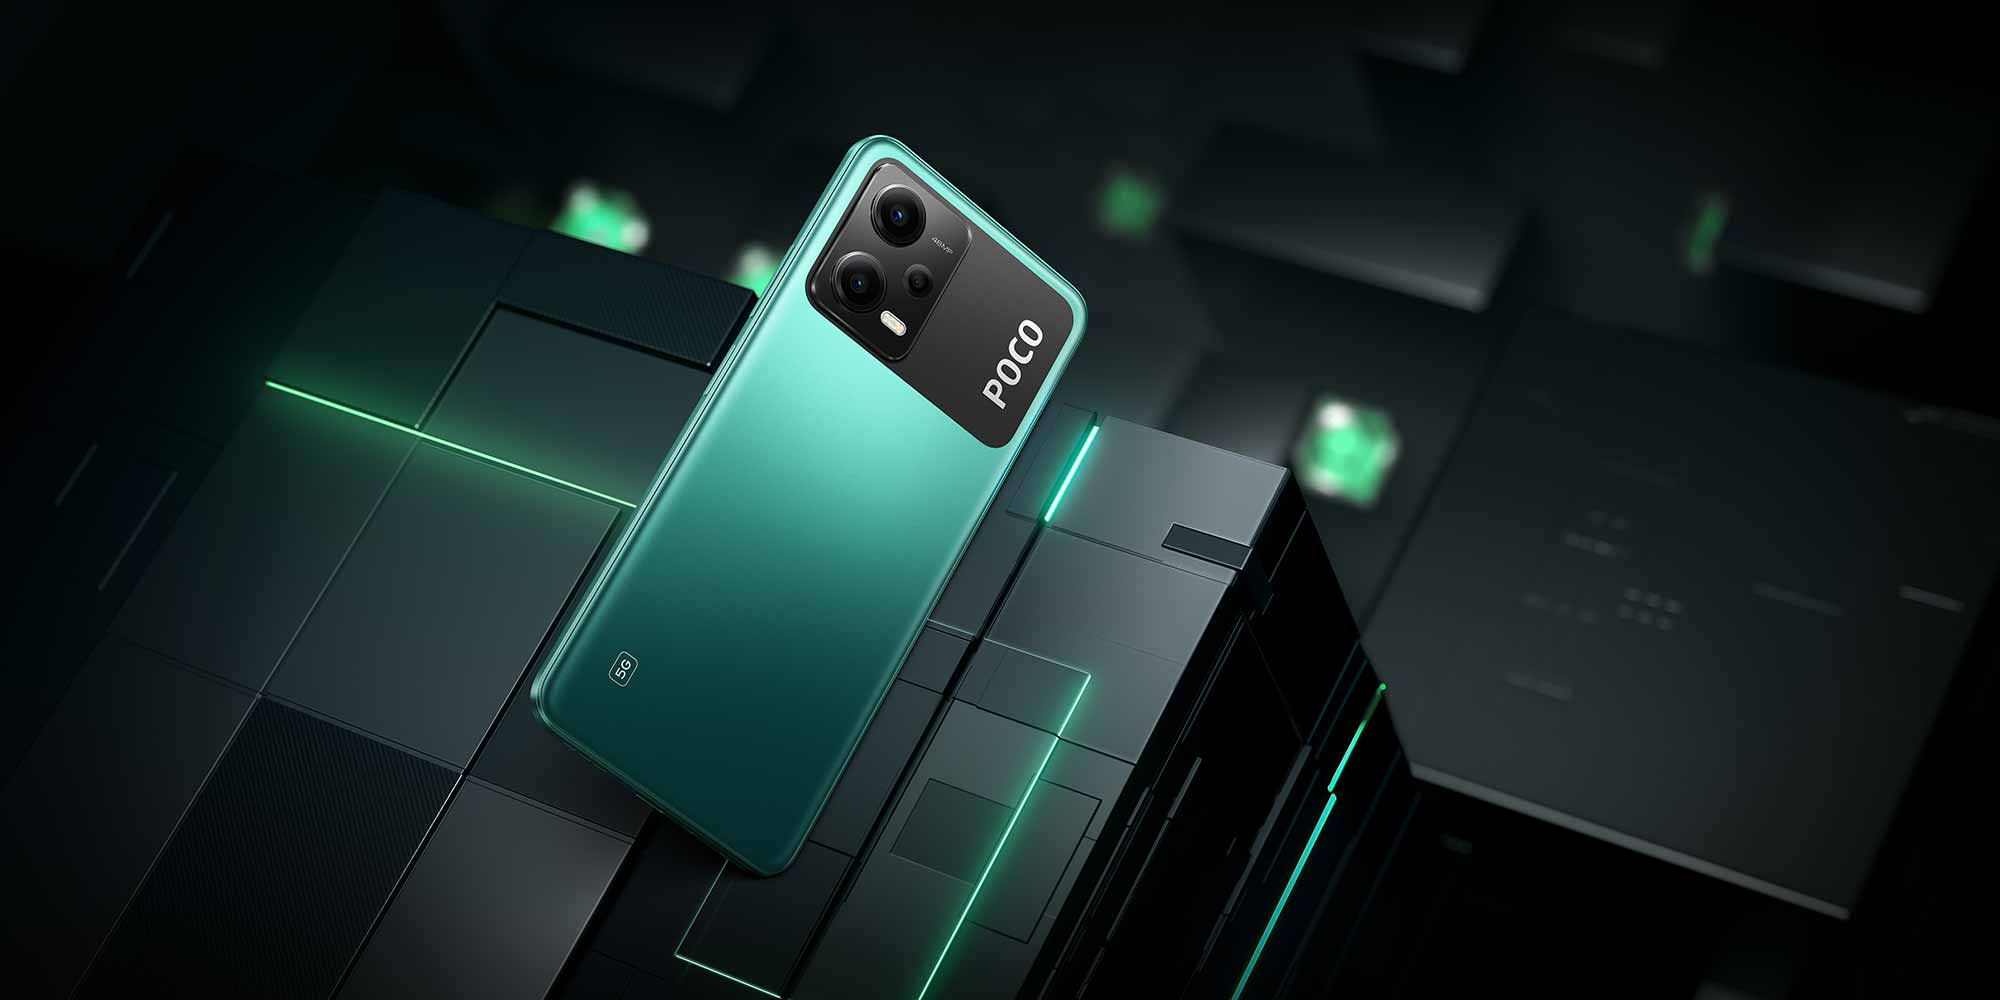 POCO X5 Pro 5G: Xiaomi's first global MIUI 14 device launches with 120 Hz  AMOLED display and 108 MP triple camera -  News